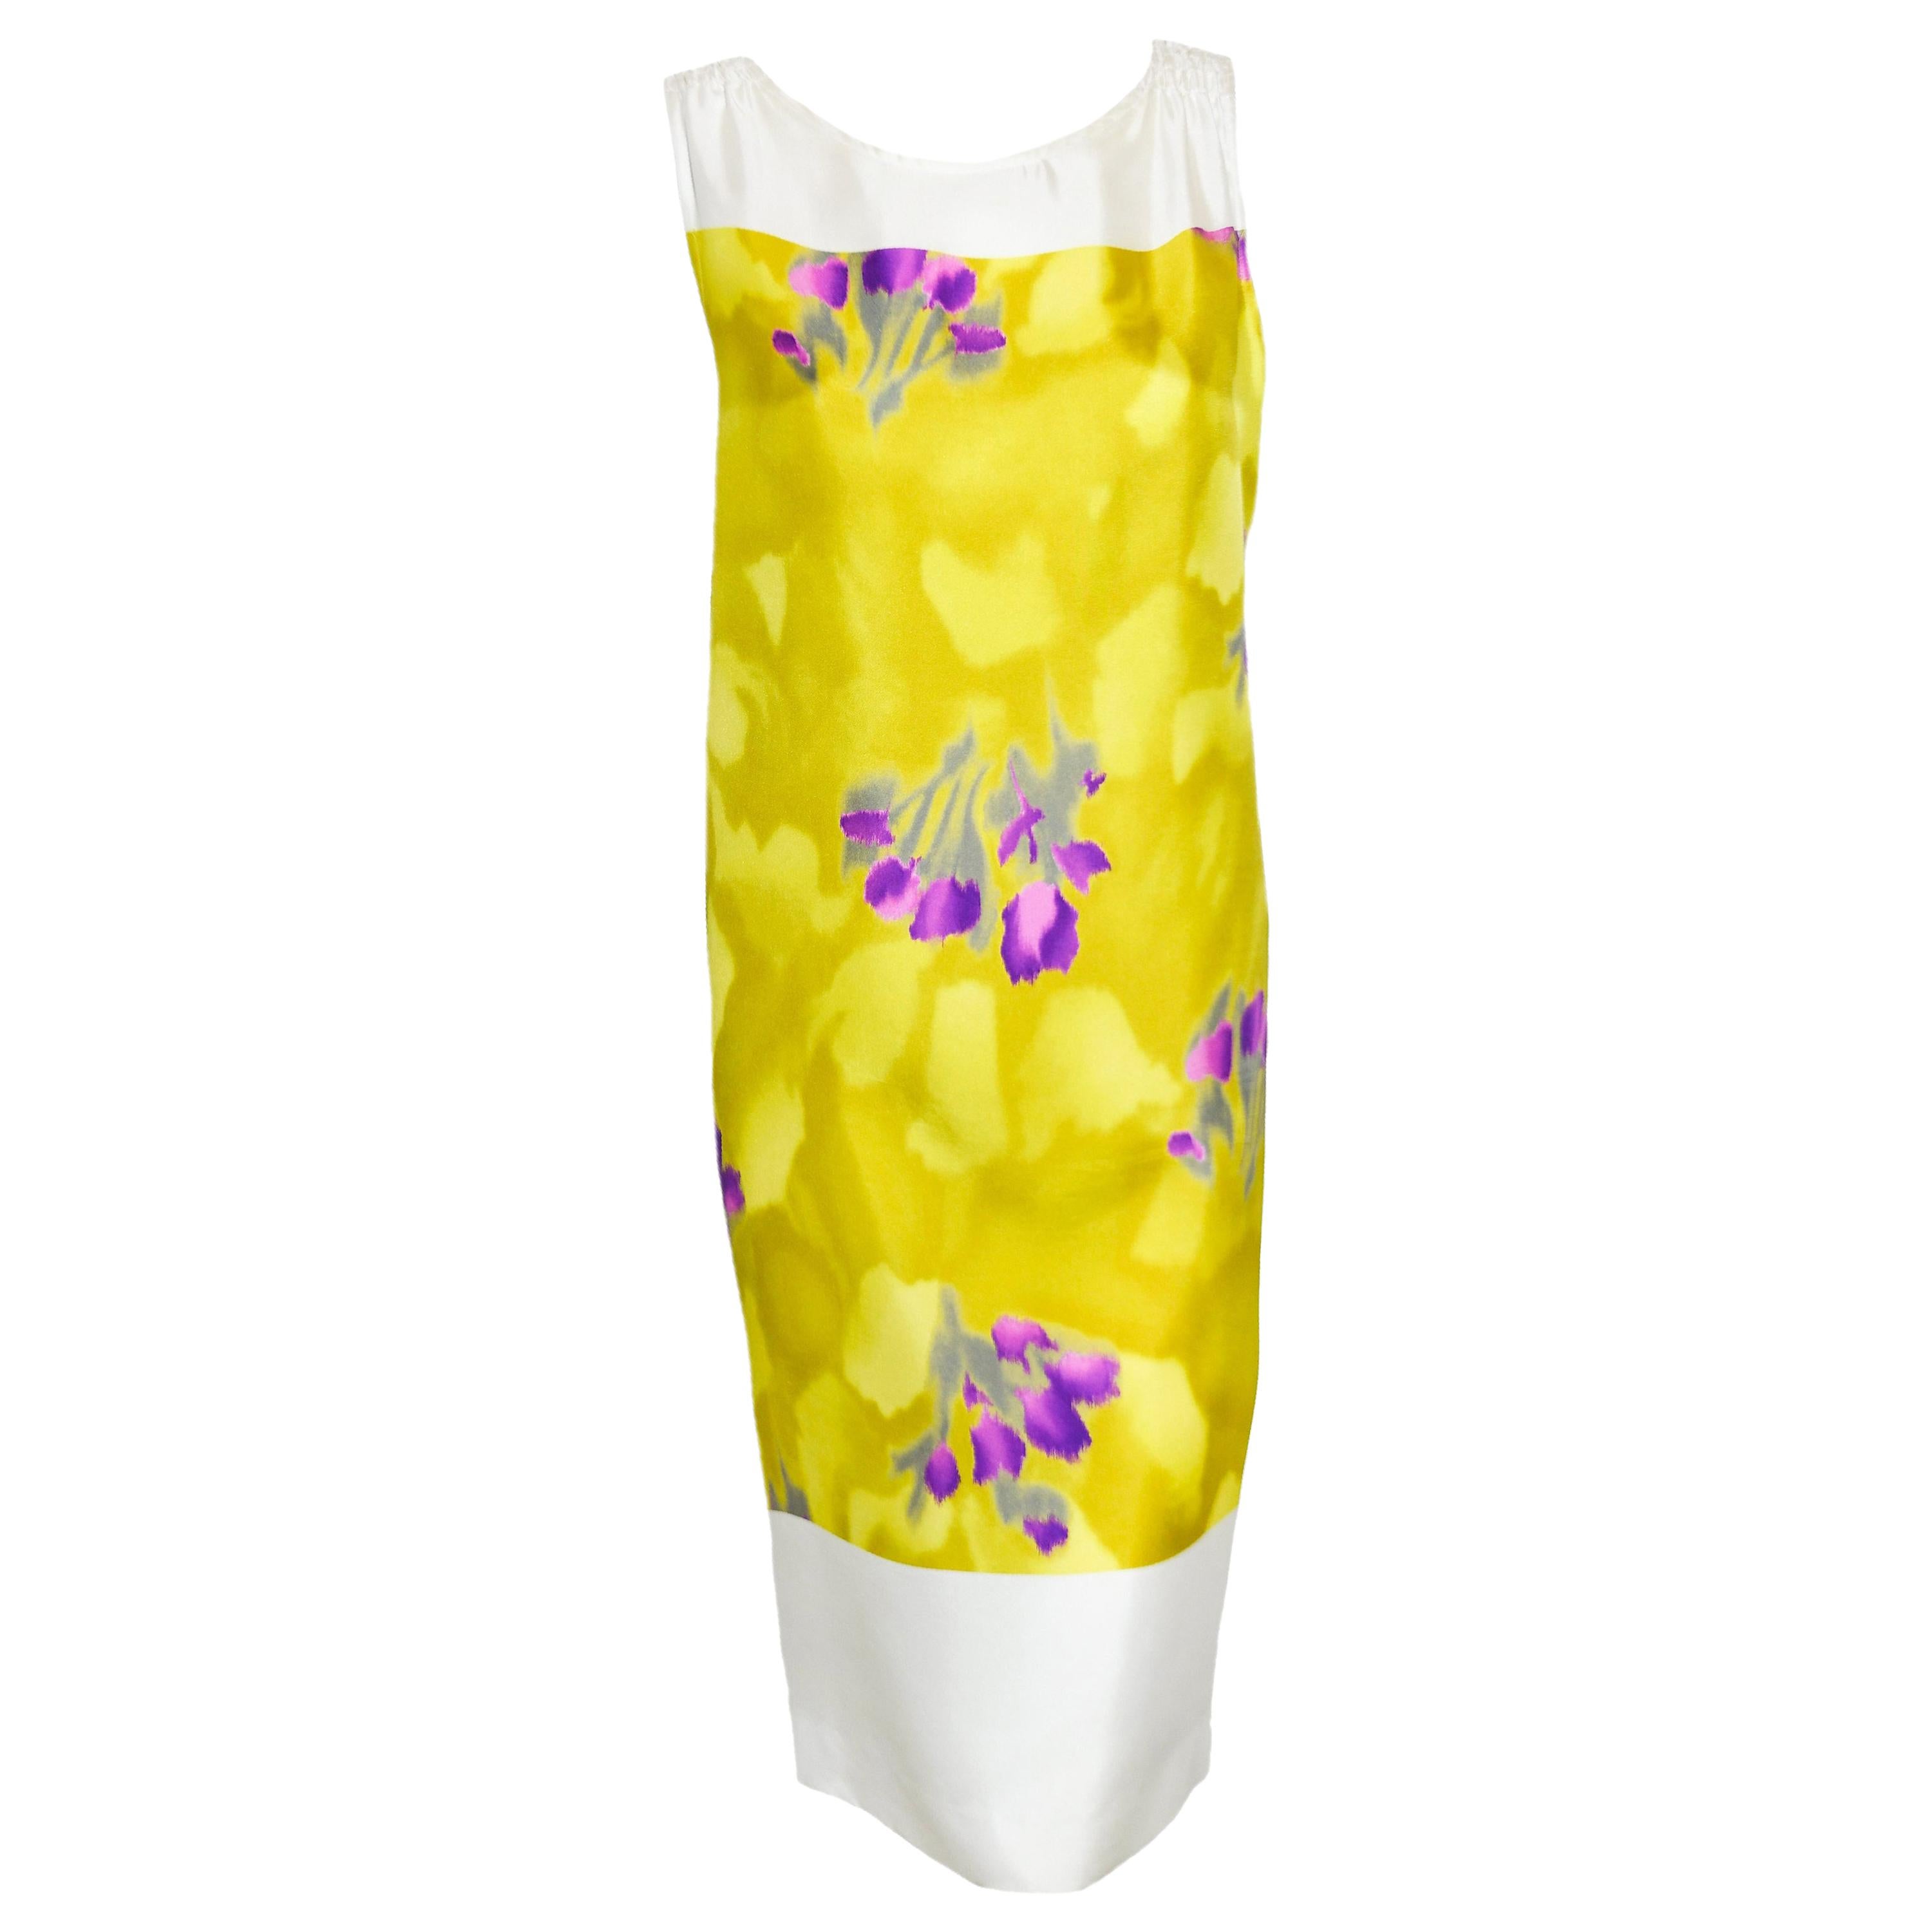 Dries Van Noten White, Yellow & Violet Floral Sleeveless Dress For Sale